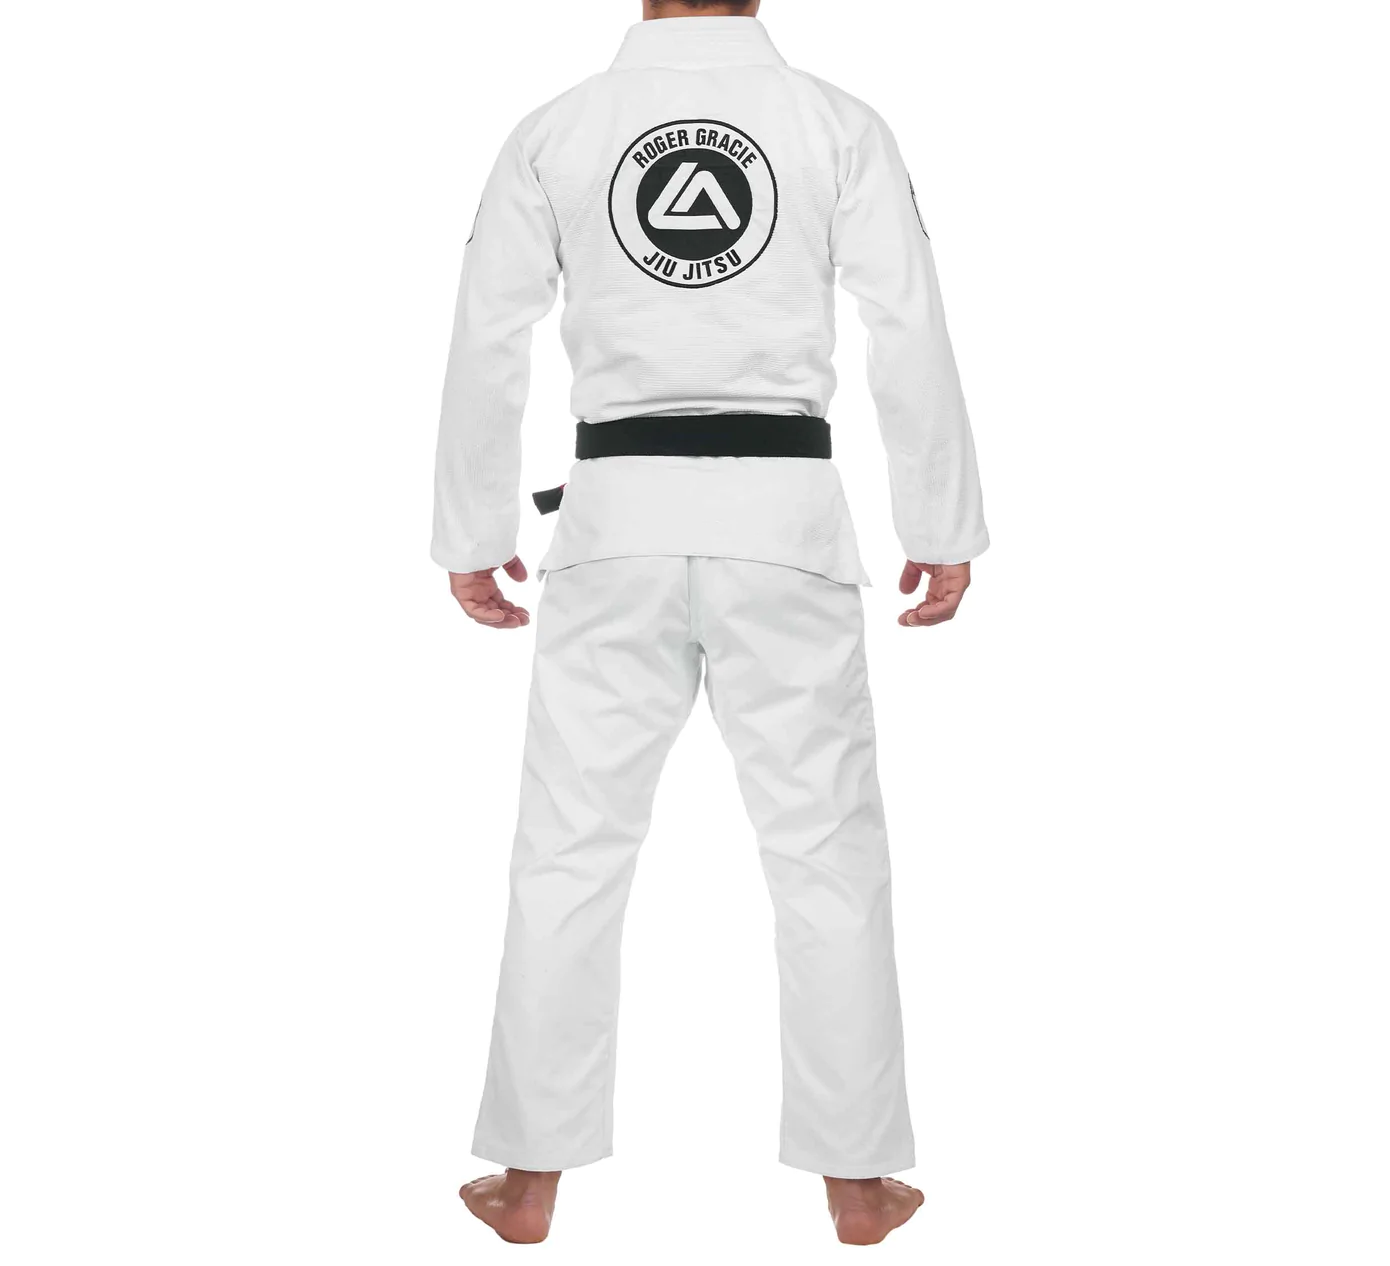 Rear view of a Roger Gracie Gi for kids